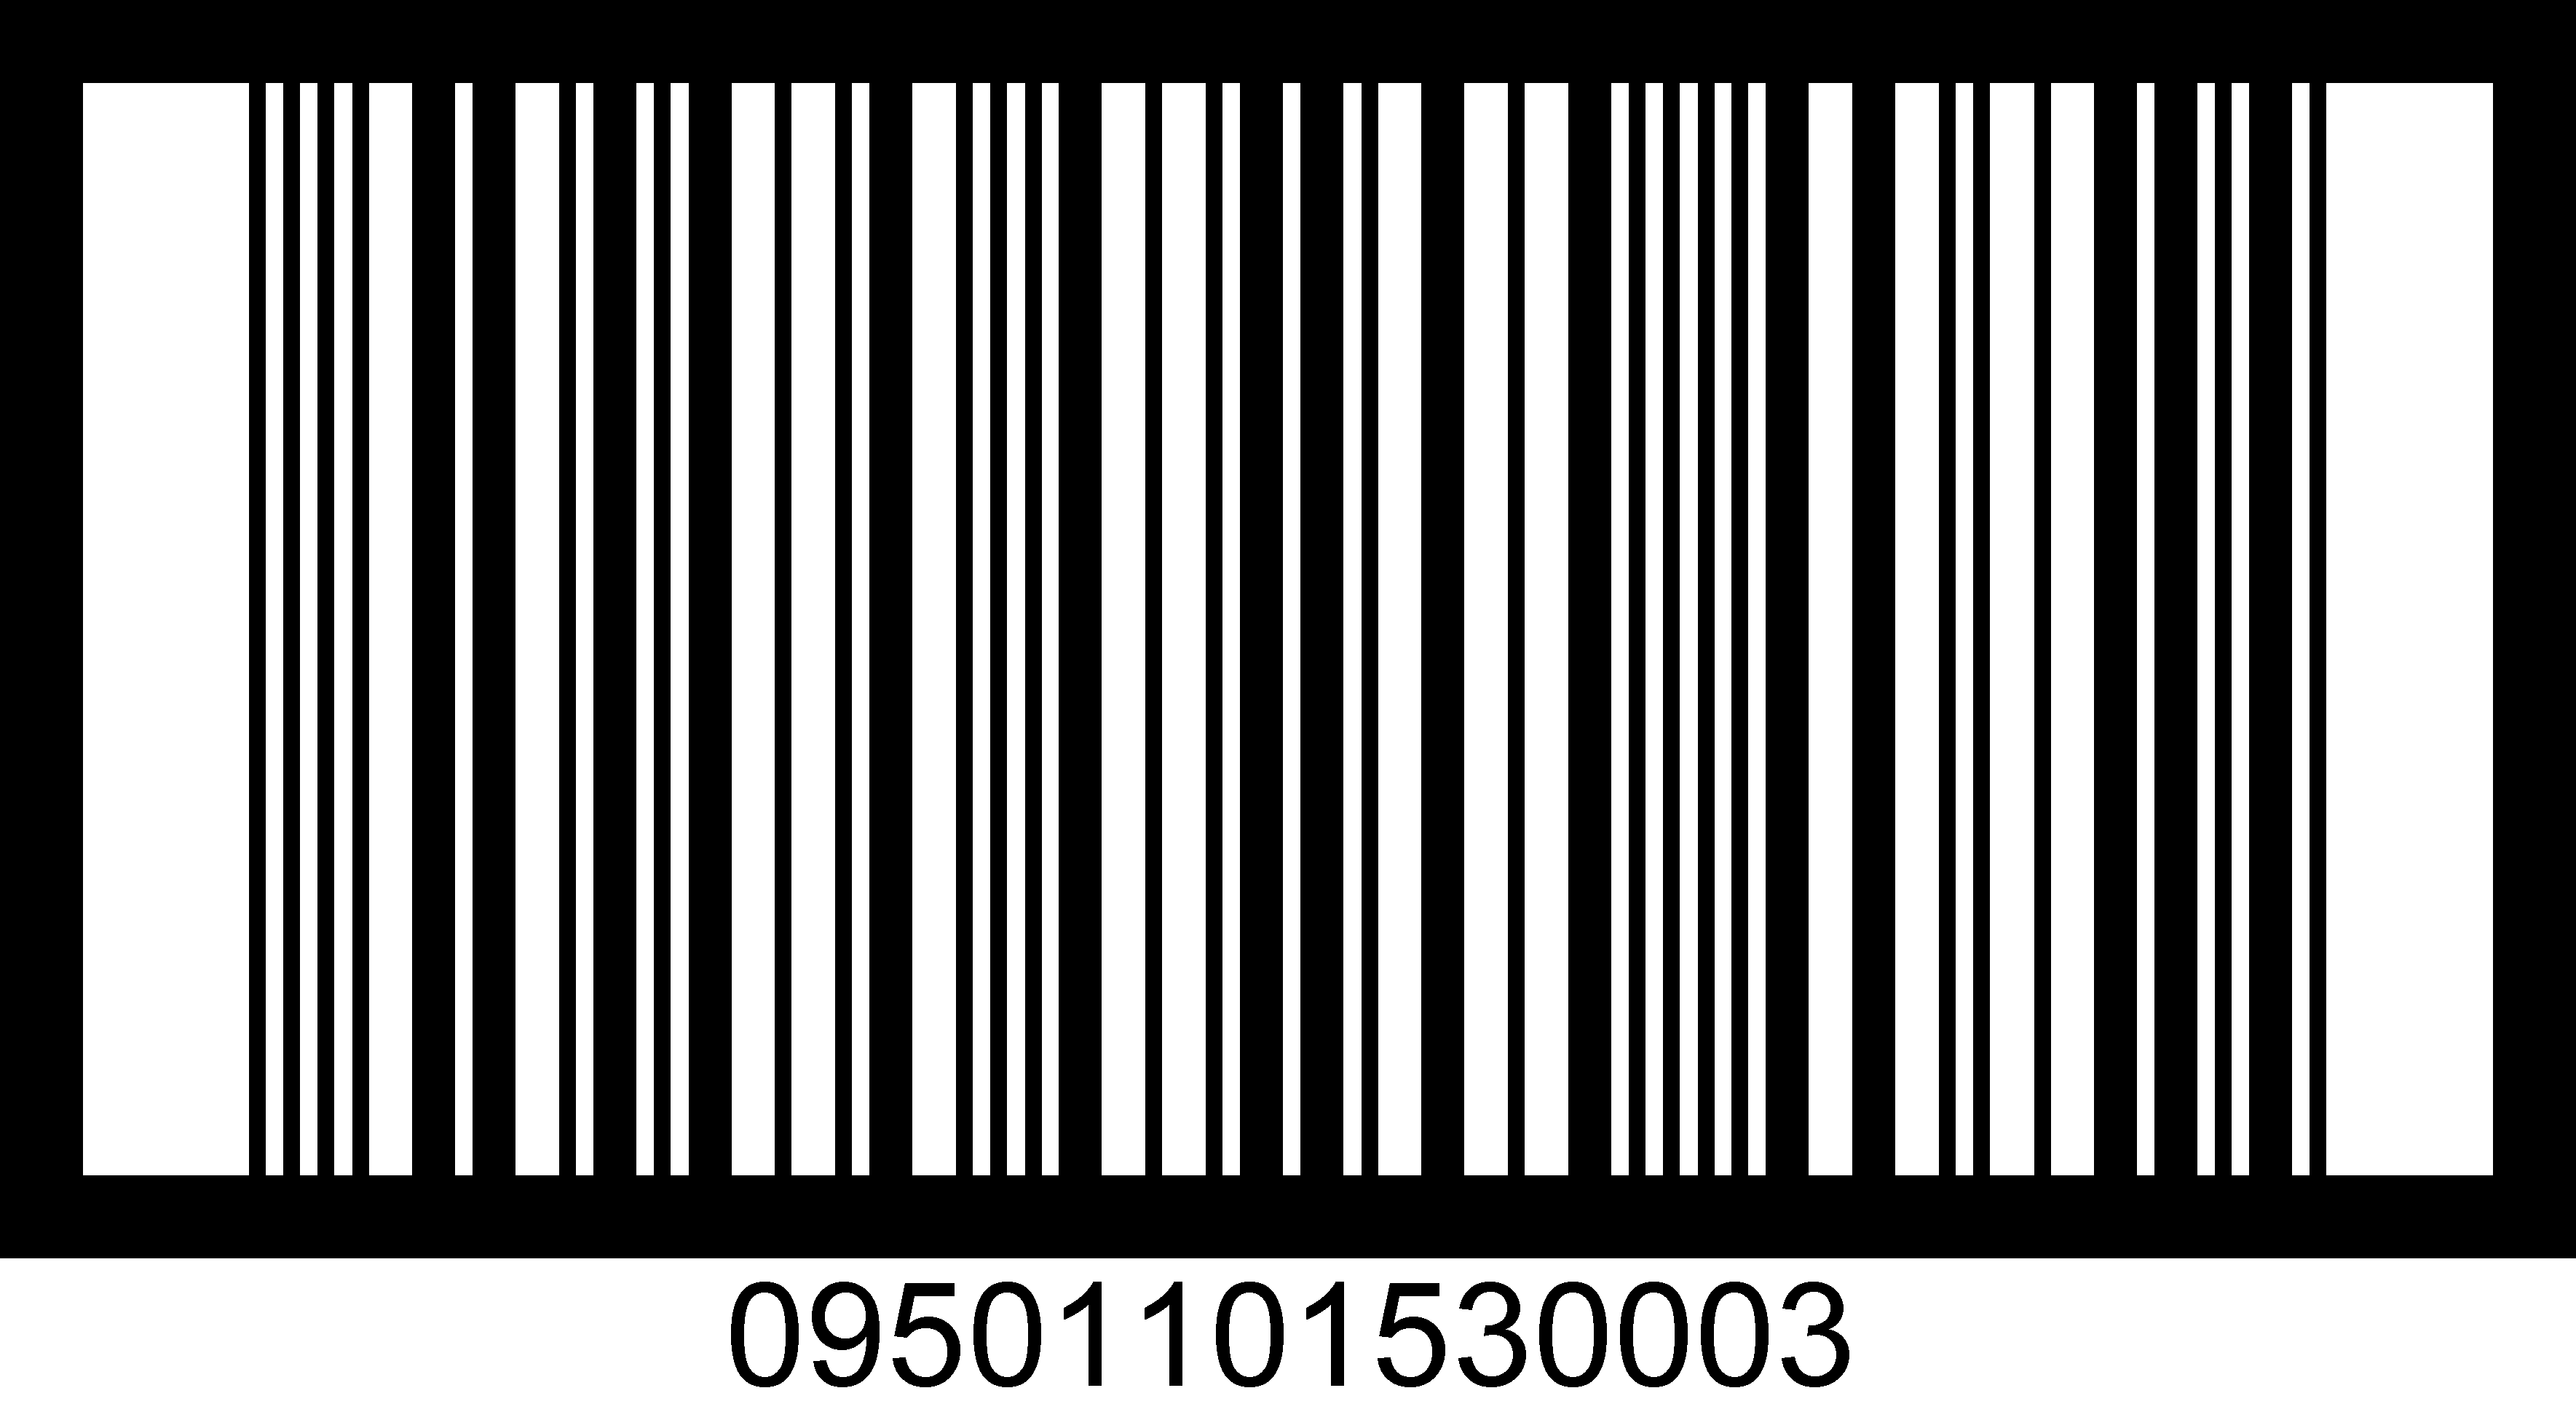 Detail Images Of Barcodes Nomer 10